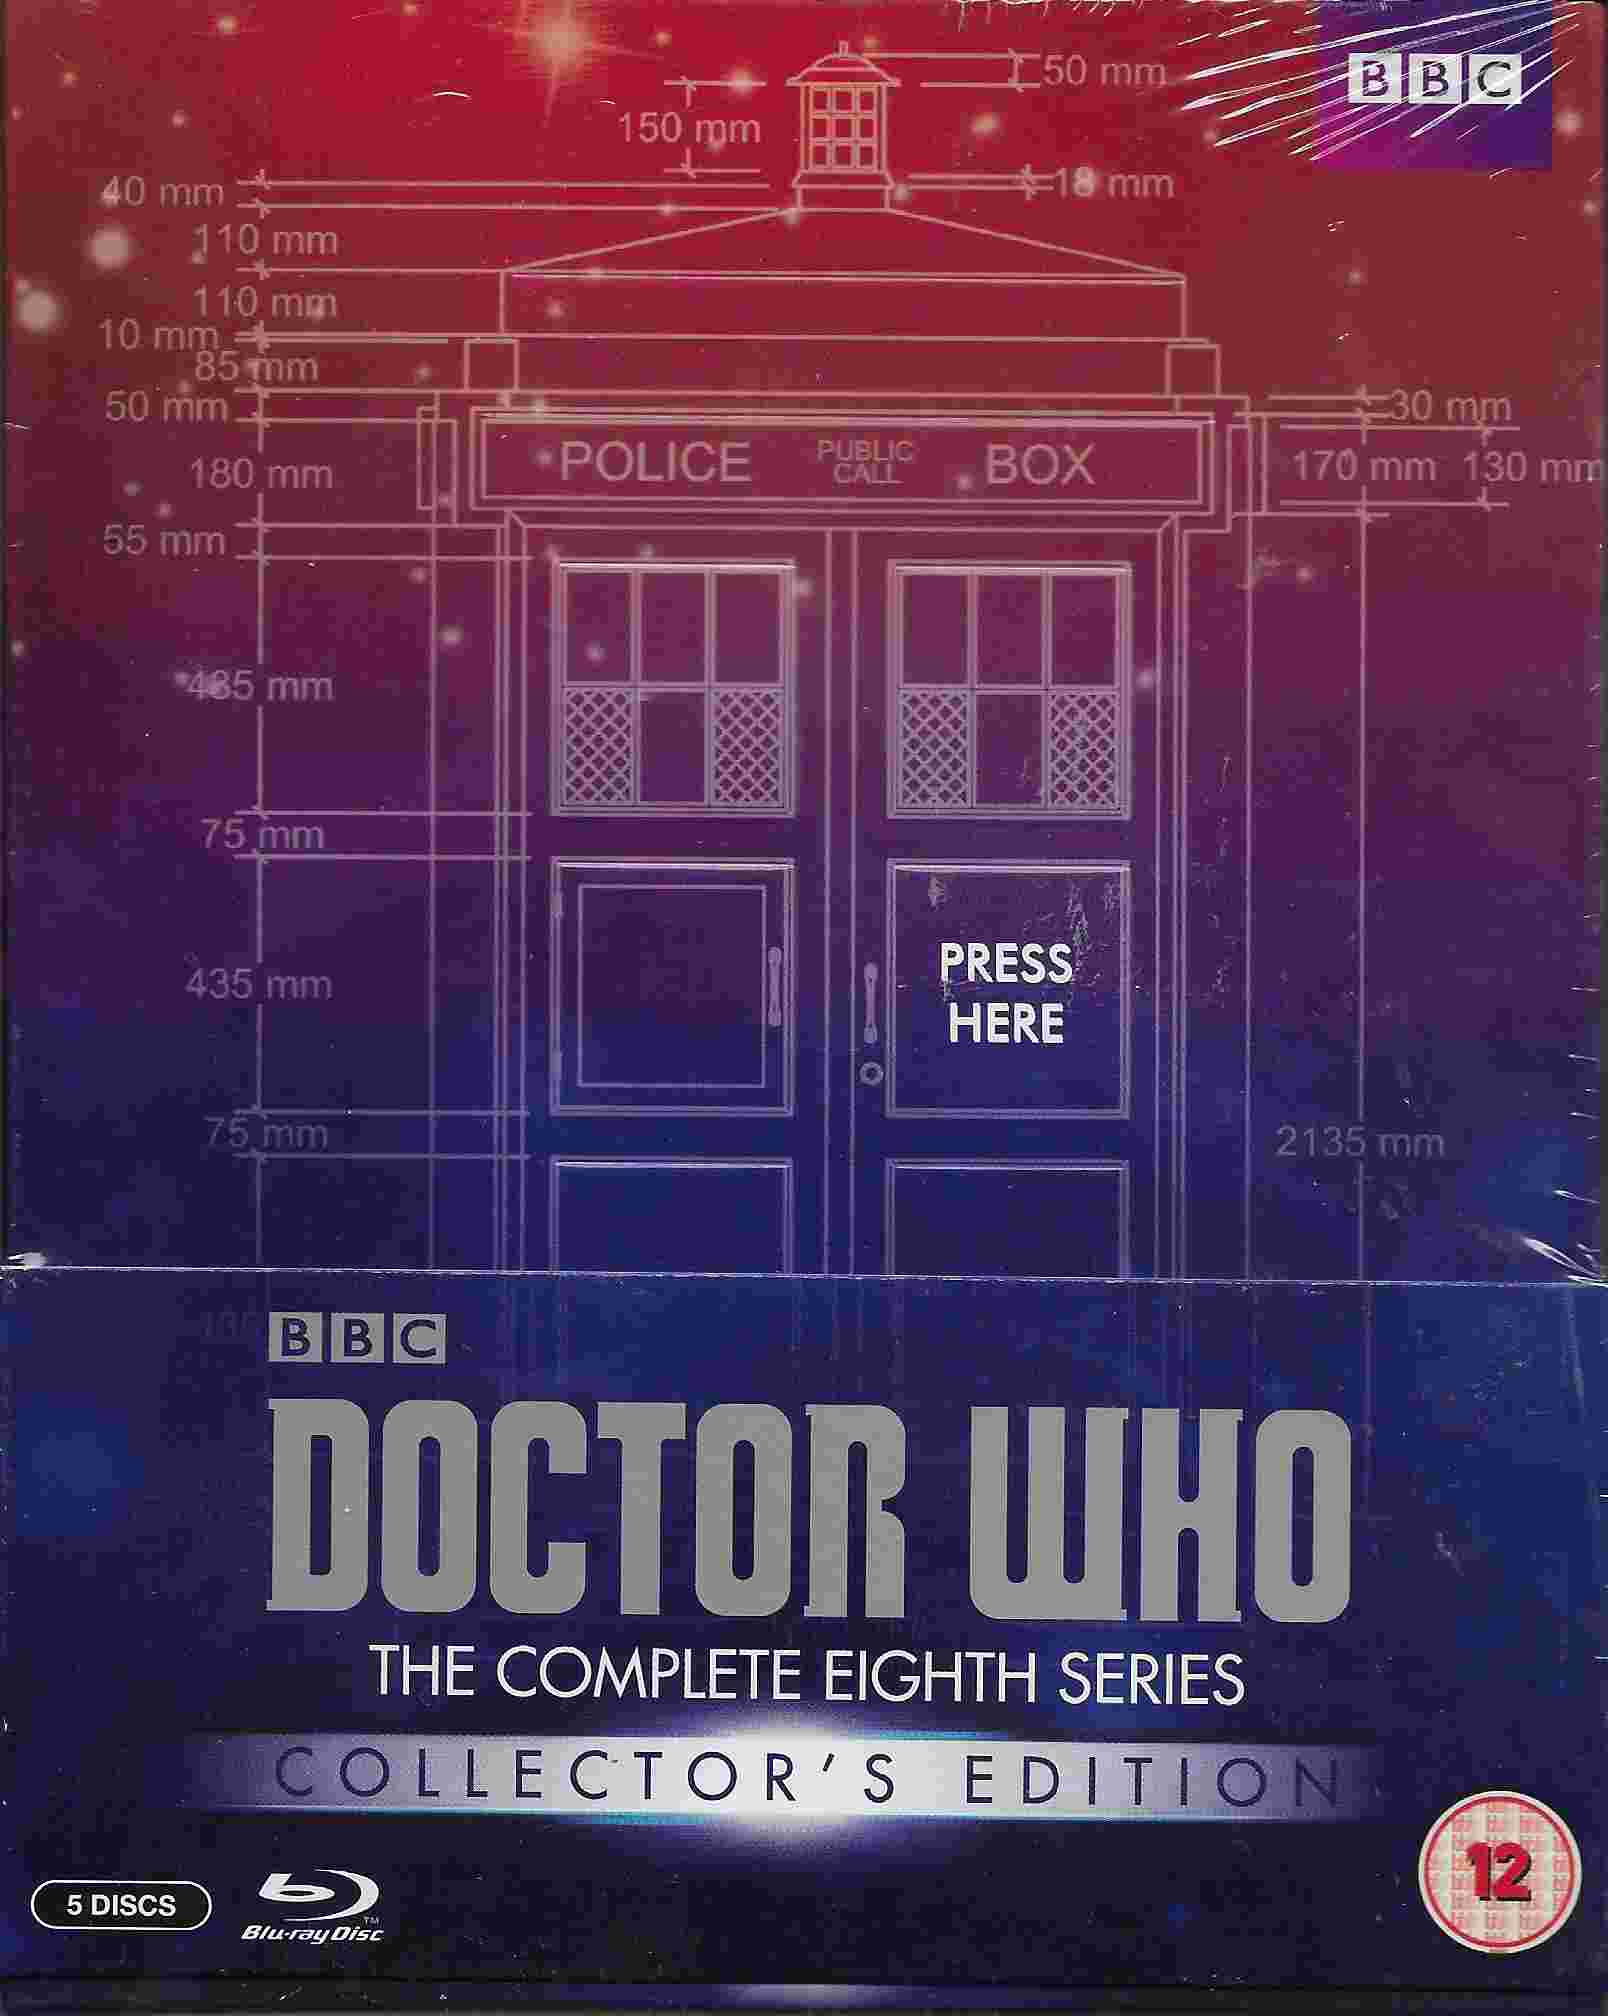 Picture of BBCBD 0289 Doctor Who - Series 8 boxed set by artist Various from the BBC blu-rays - Records and Tapes library